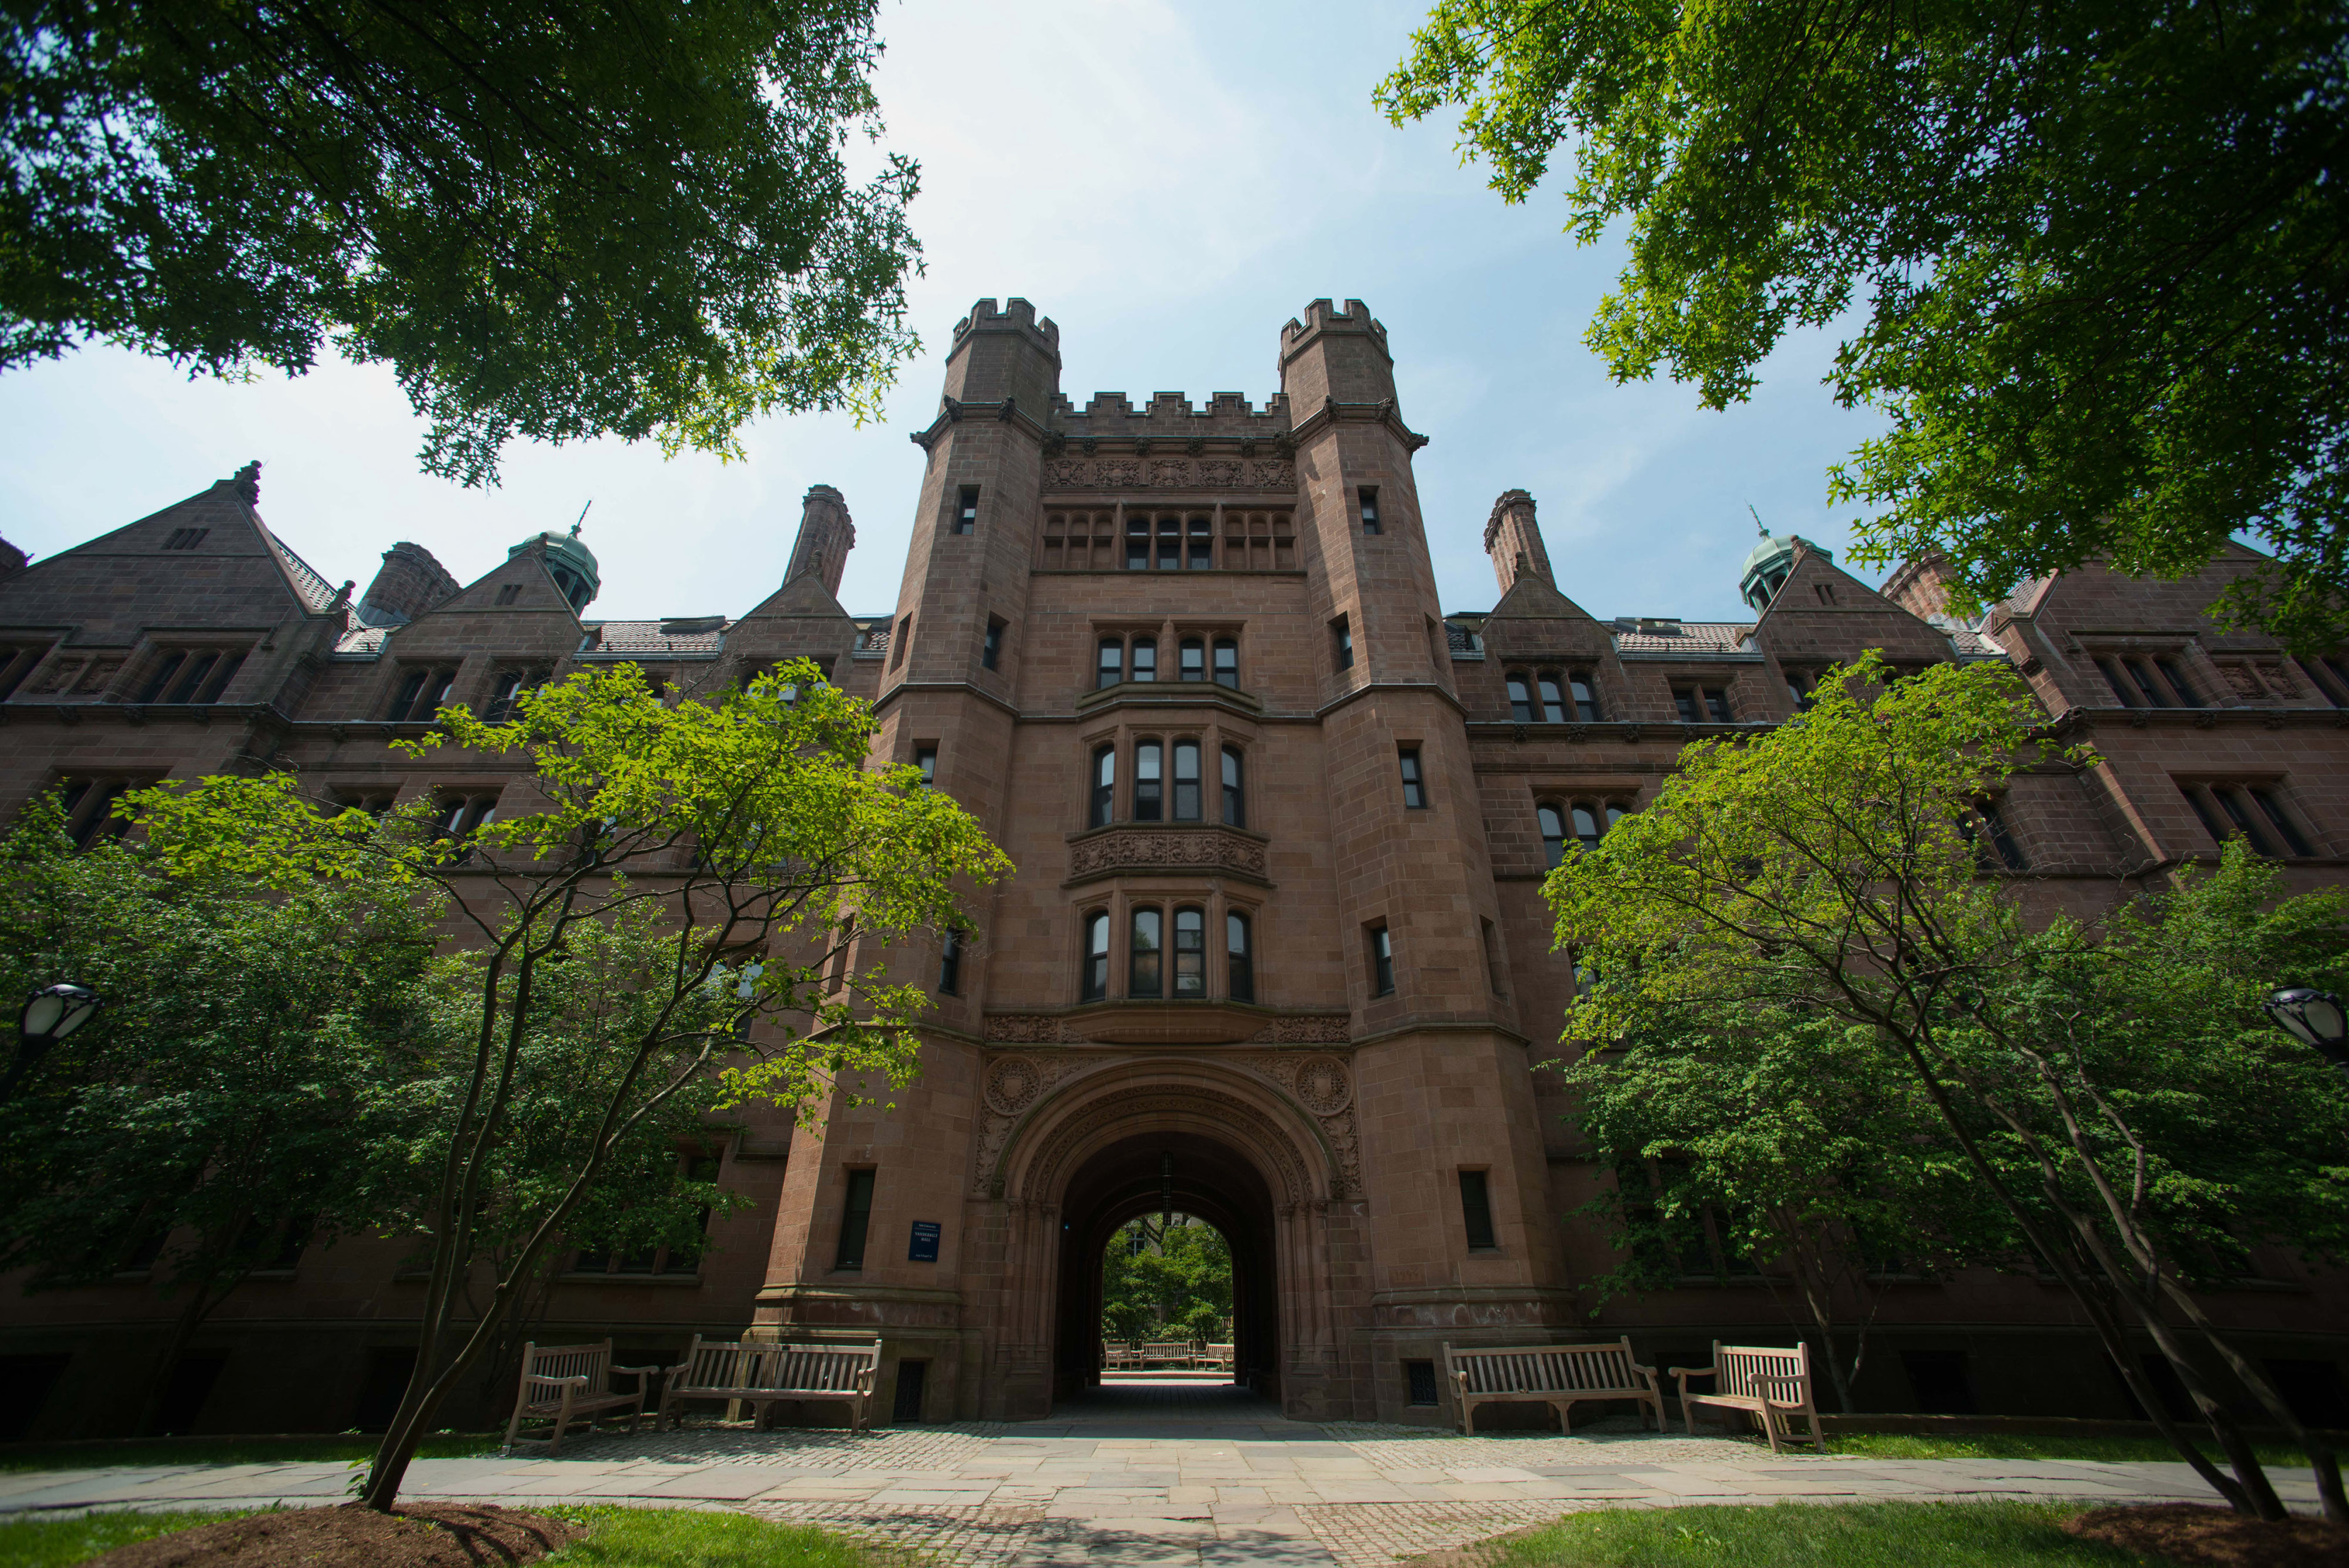 Vanderbilt Hall stands on the Yale University campus in New Haven, Connecticut on June 12, 2015. (Craig Warga—Bloomberg/Getty Images)